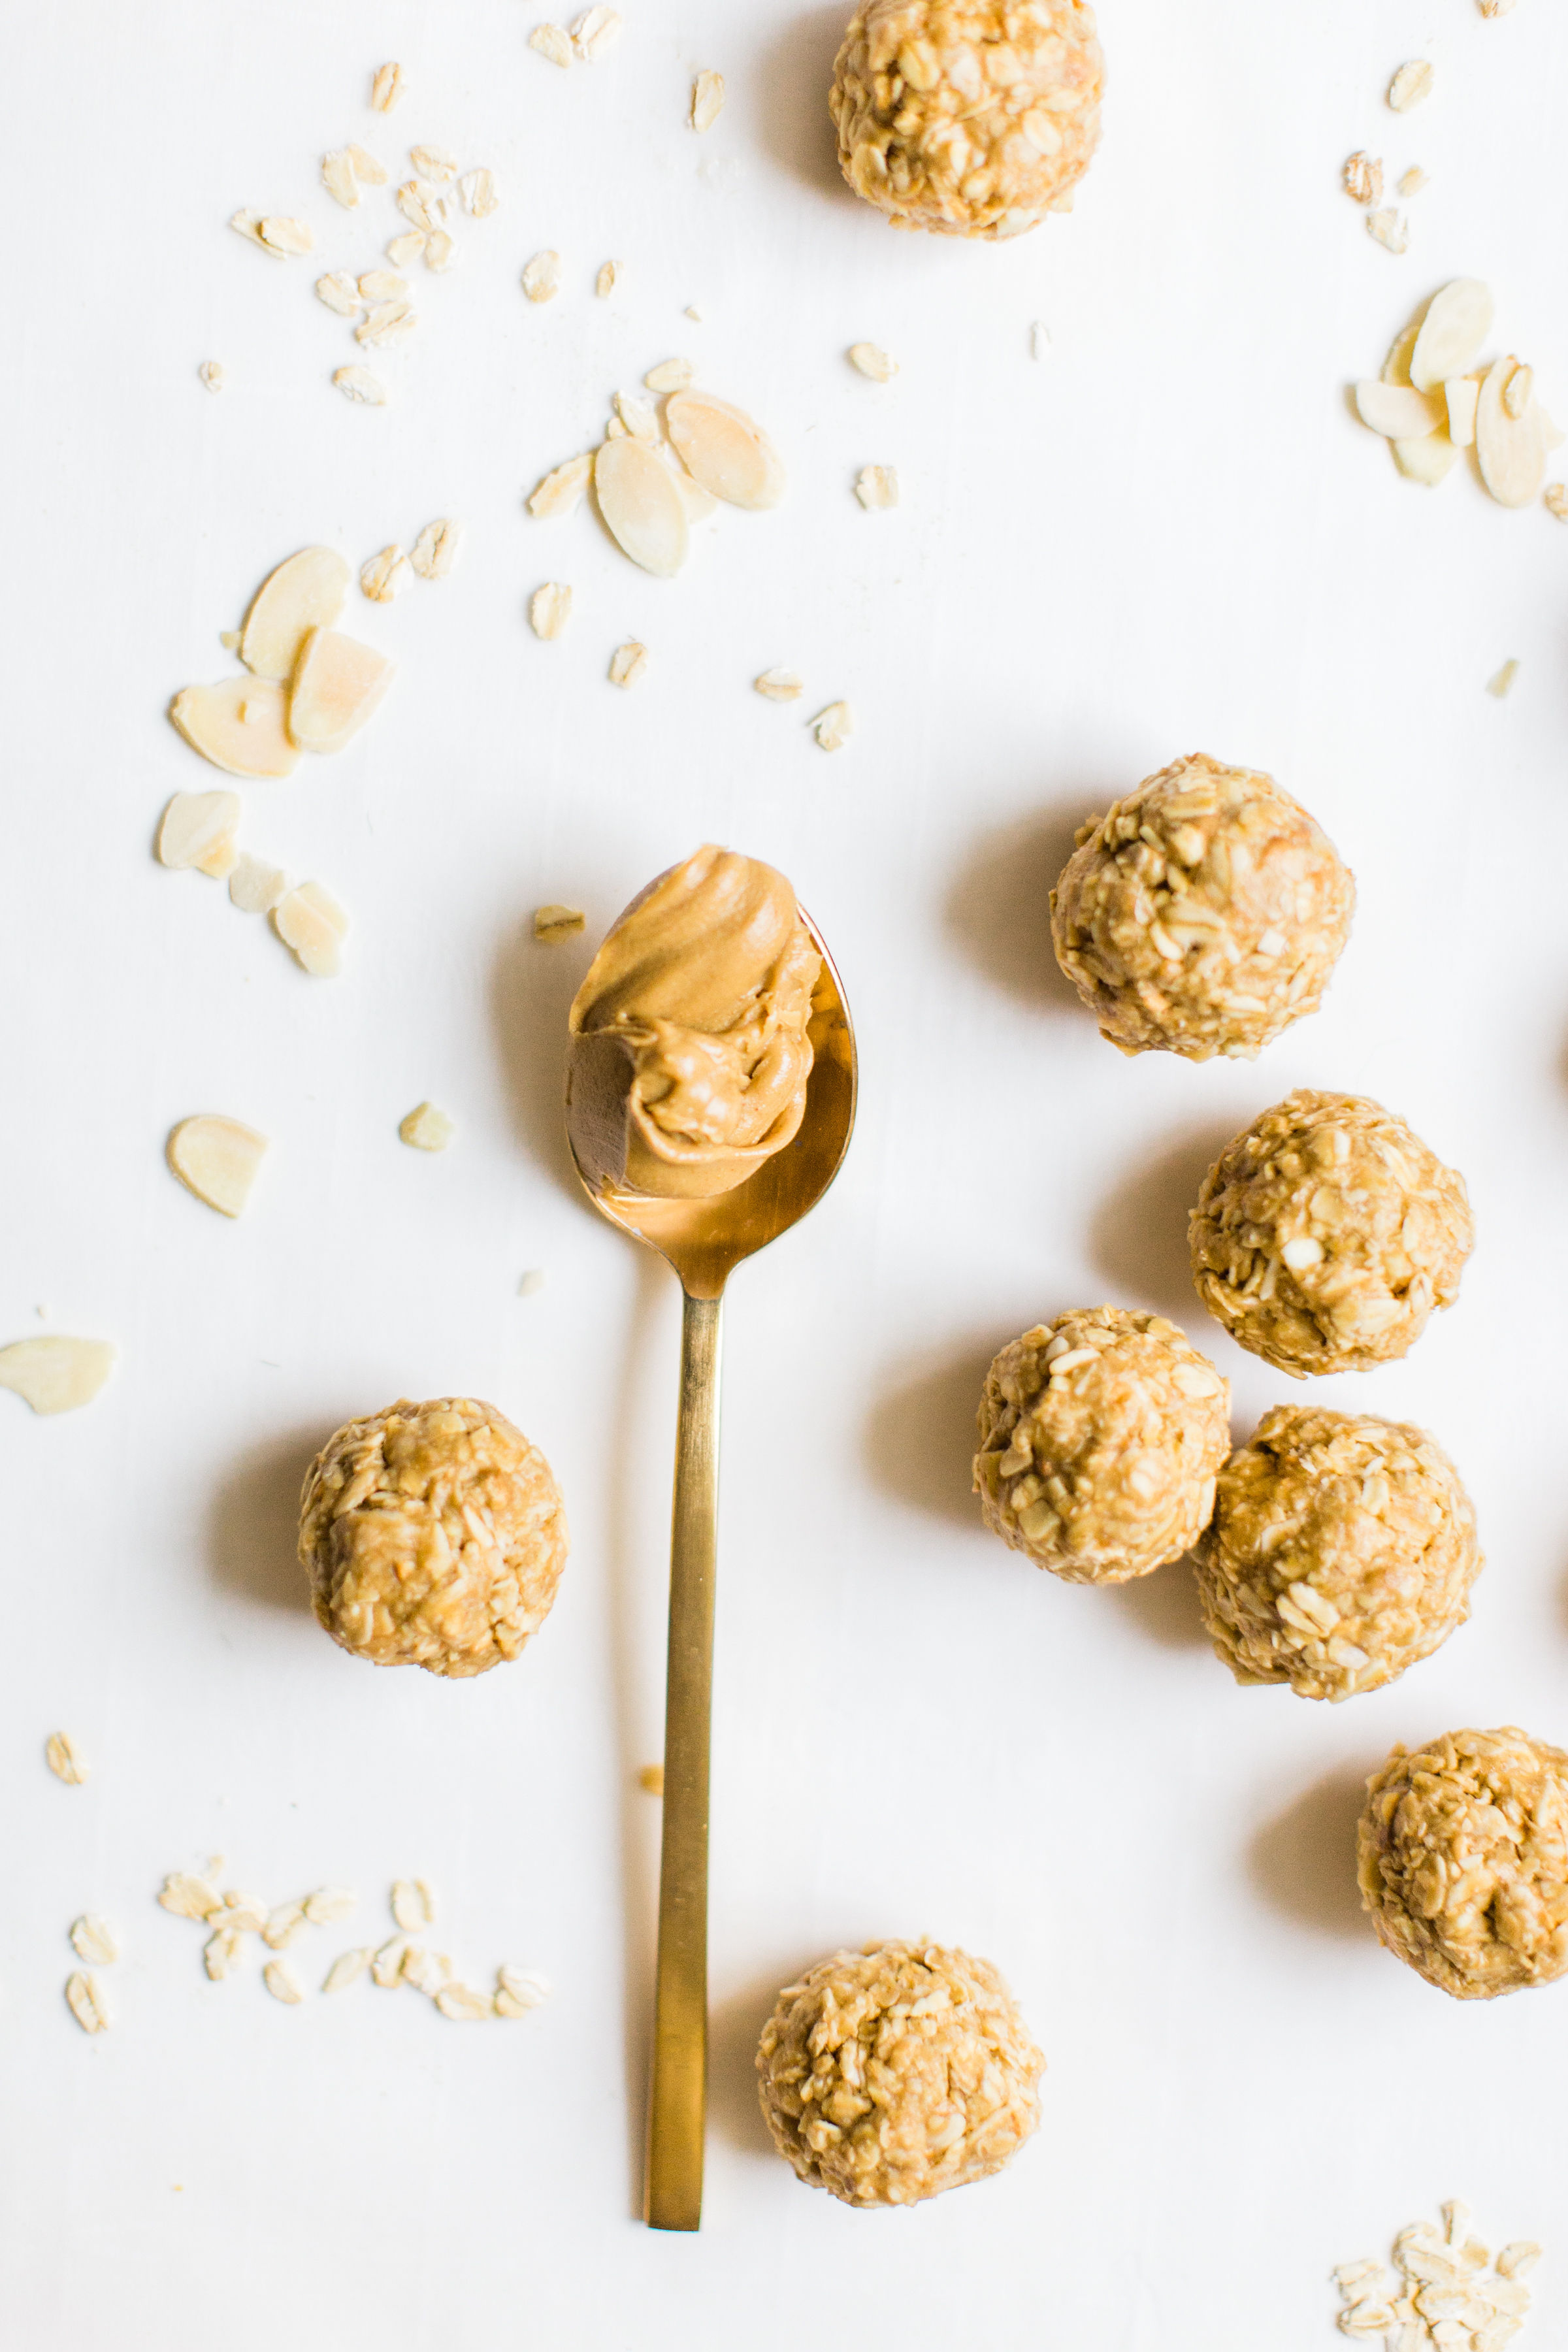  Snack Idea of Sweet and Salty No-Bake Peanut Butter Oatmeal Energy Bites